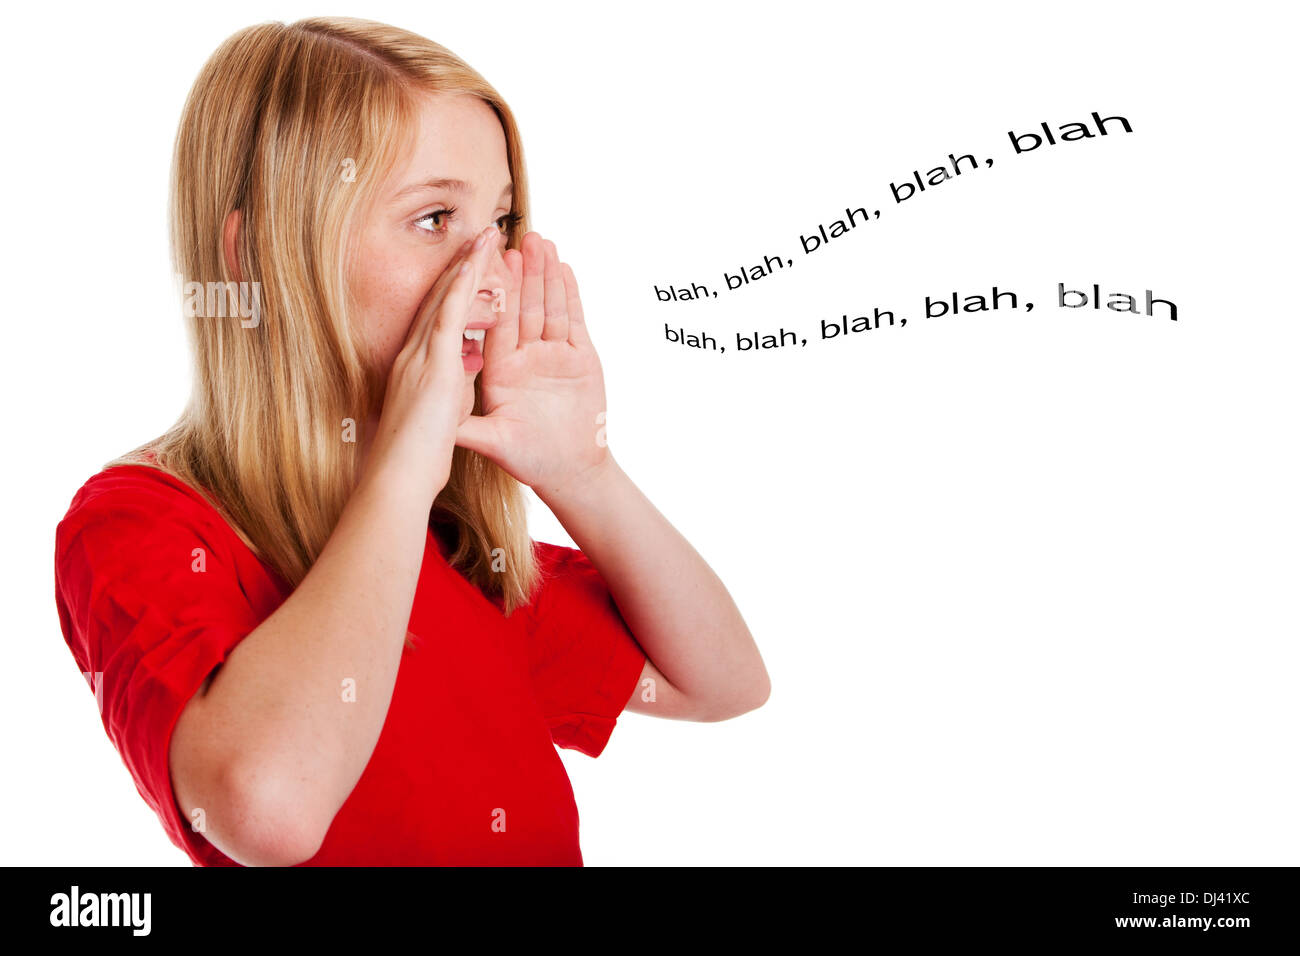 Child speaking out loud Stock Photo